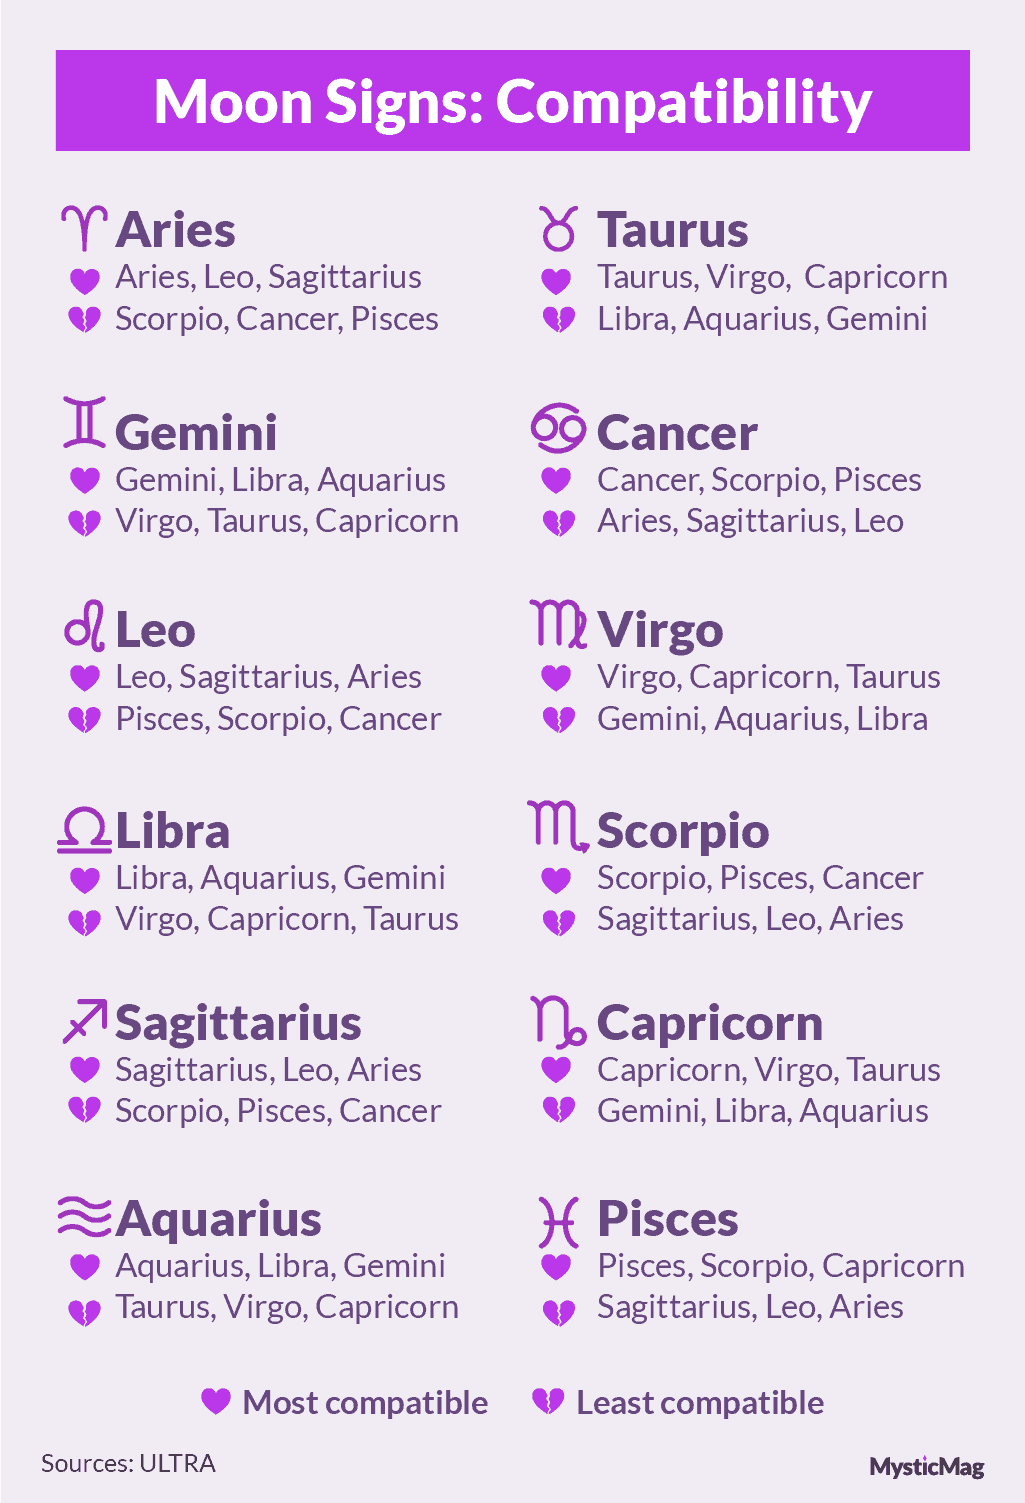 Moon signs and relationship compatibility